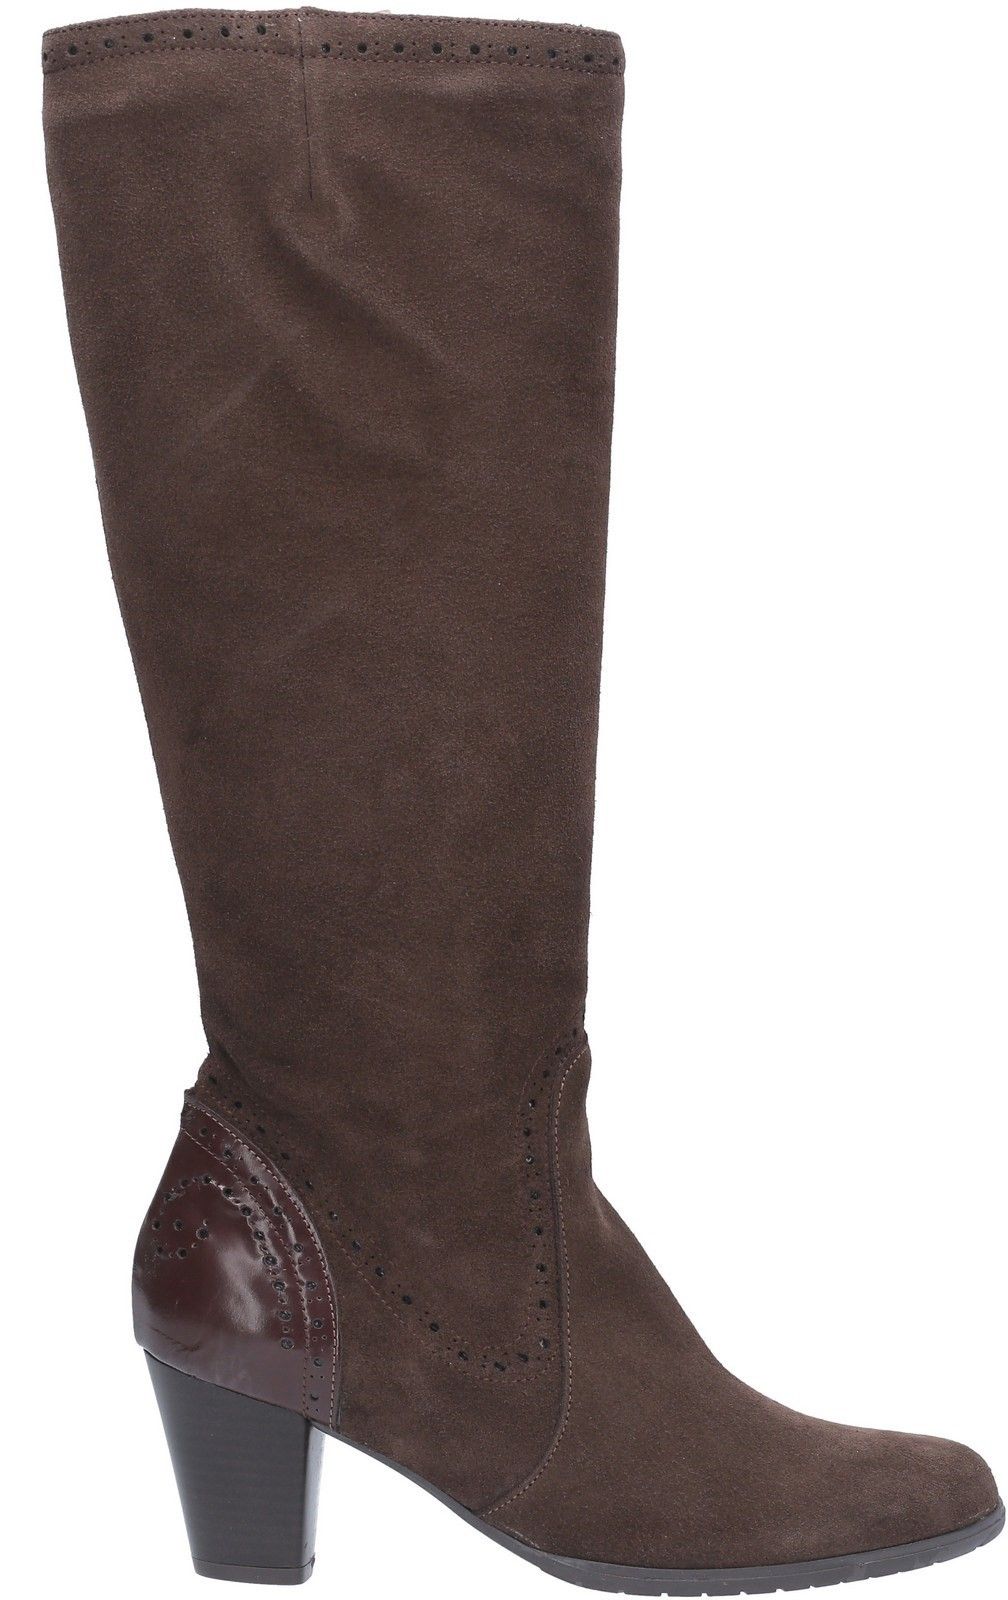 Stylish ladies long boot from Riva with luxury Suede Patent UpperSuede. 
Brogue styling on upper. 
Inner zip provides a easy comfortable fit.